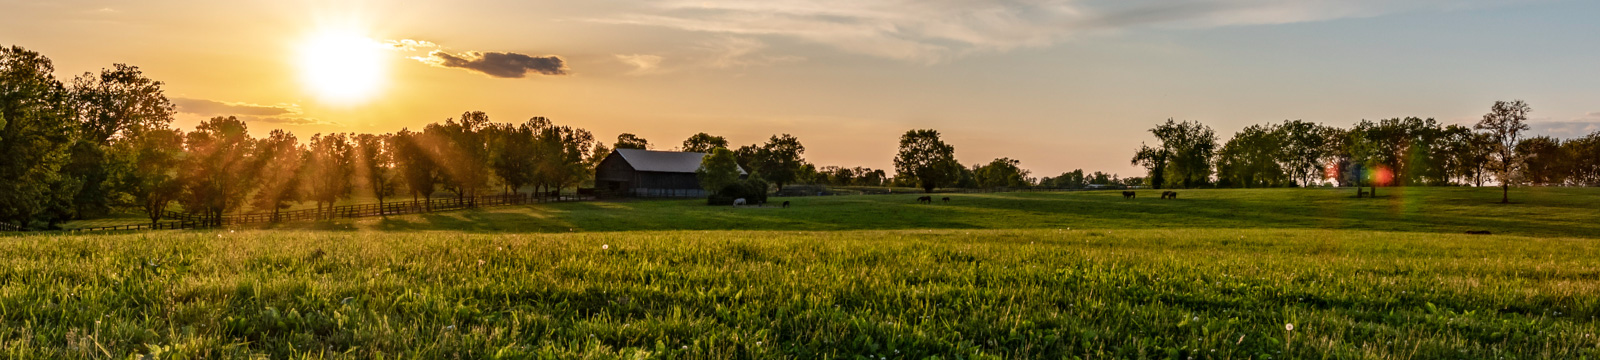 A rural scene during sunset